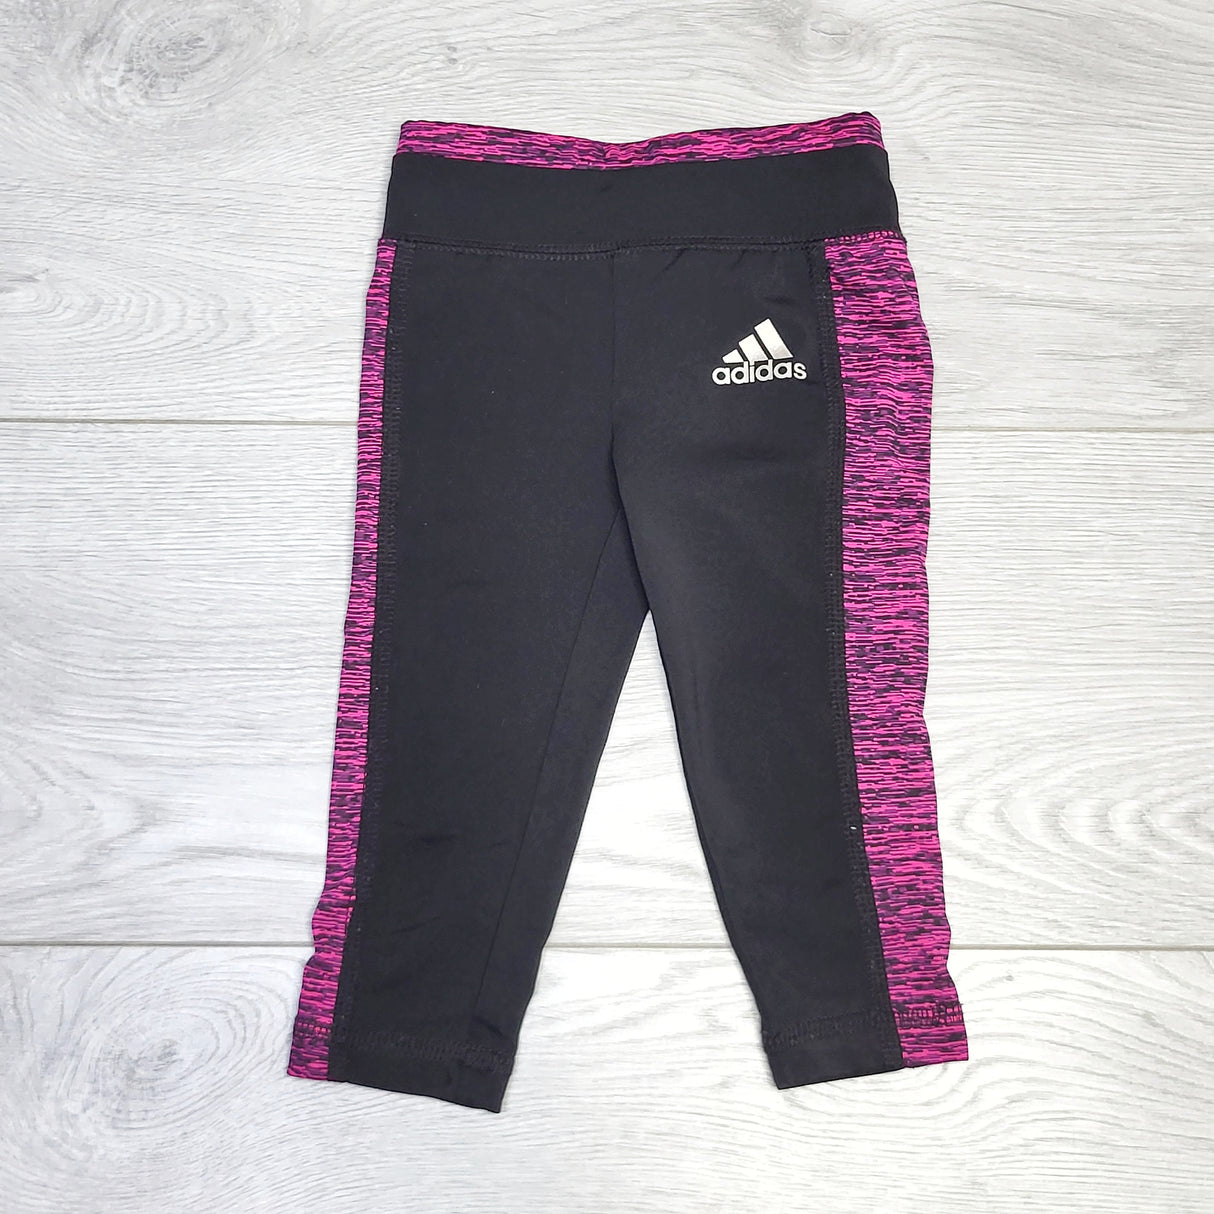 MSNDS1 - Adidas active leggings. Size 9 months